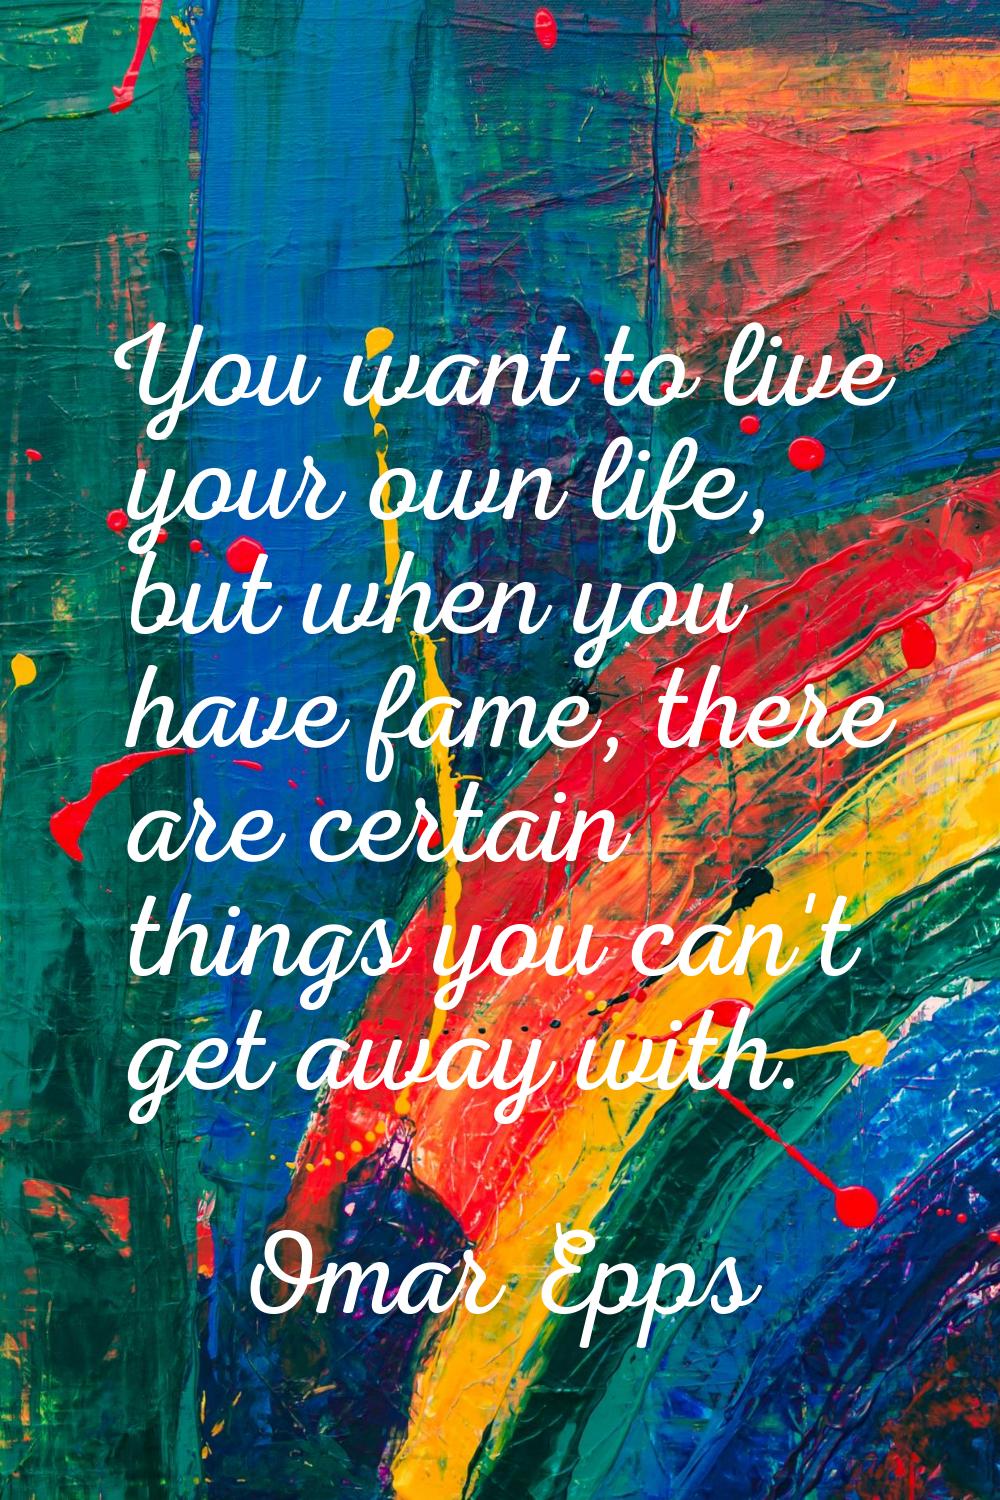 You want to live your own life, but when you have fame, there are certain things you can't get away